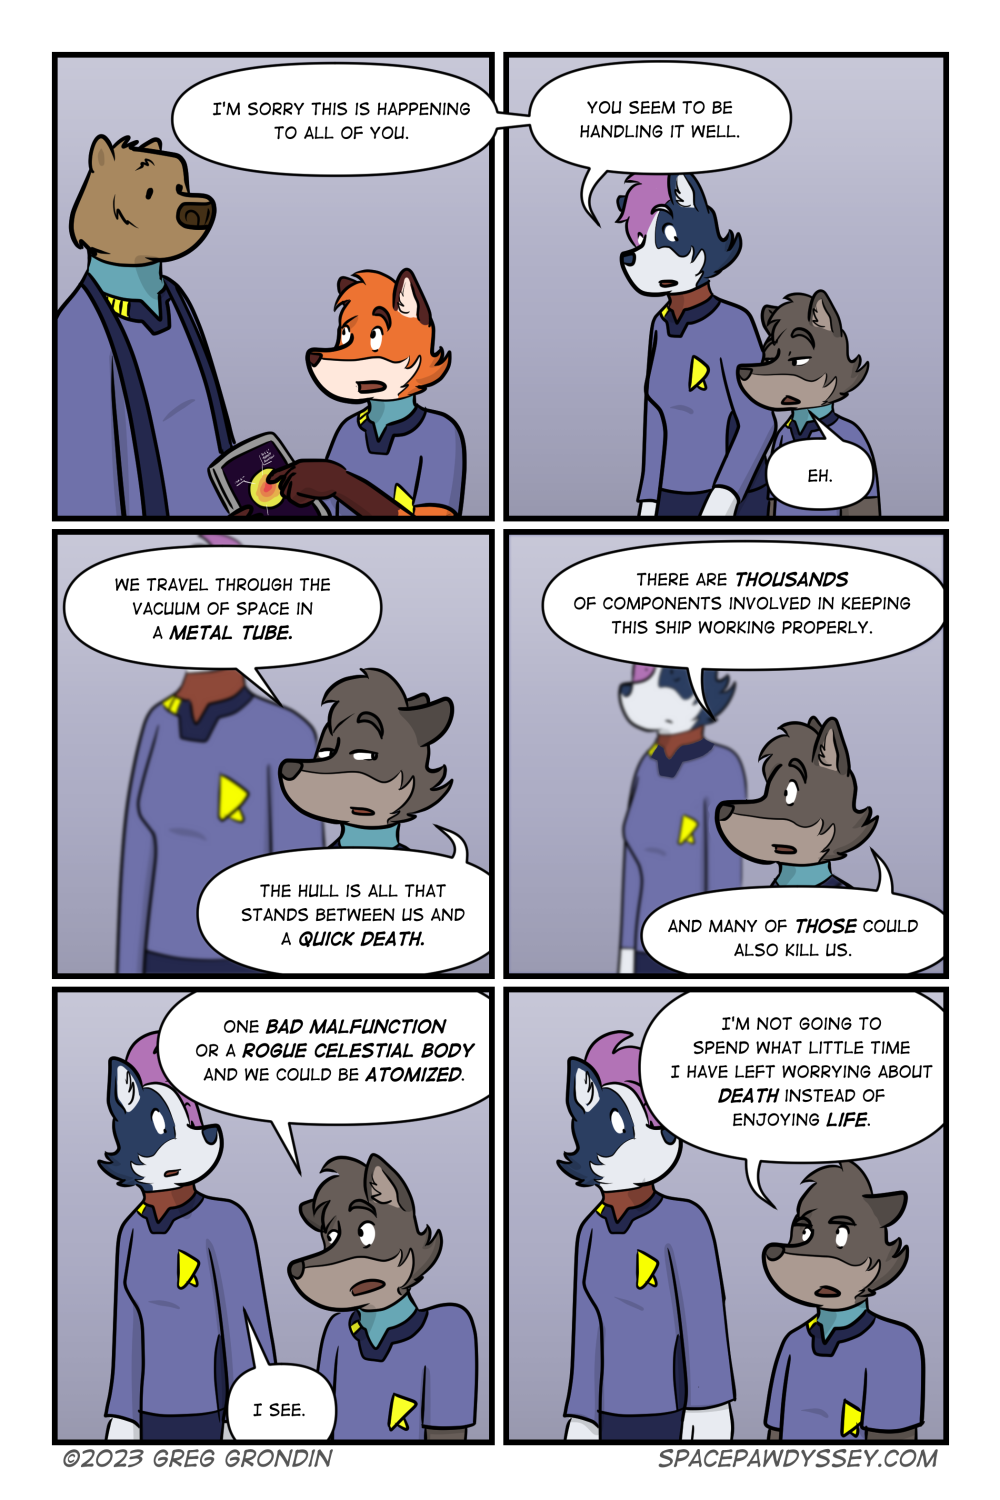 Space Pawdyssey #632